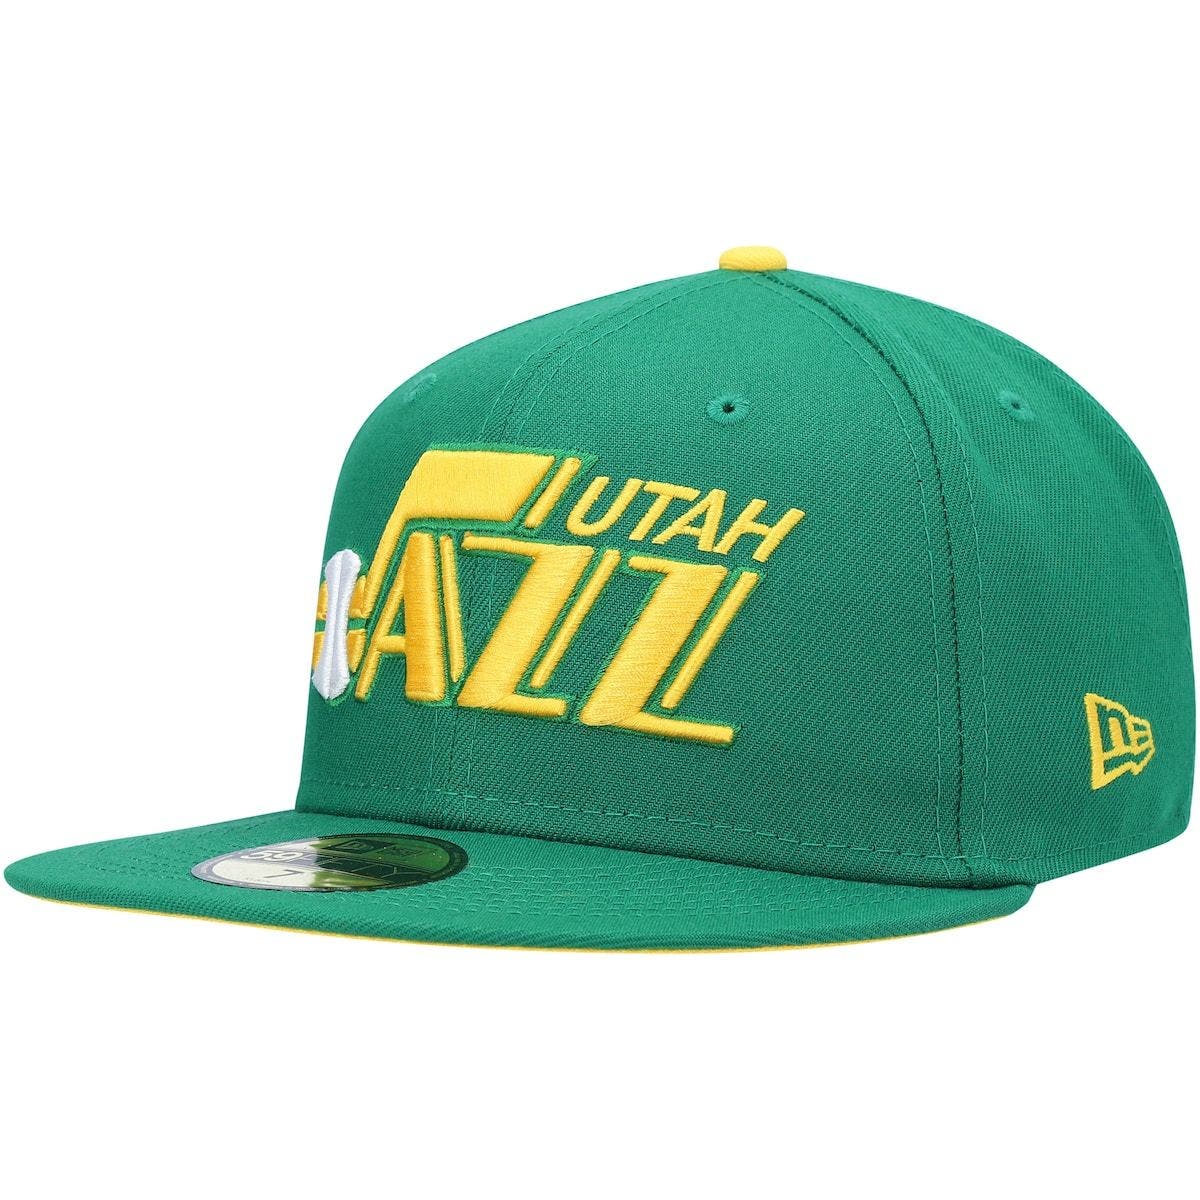 UPC 193647007706 product image for Men's New Era Green Utah Jazz Hardwood Classics 59FIFTY Fitted Hat at Nordstrom, | upcitemdb.com